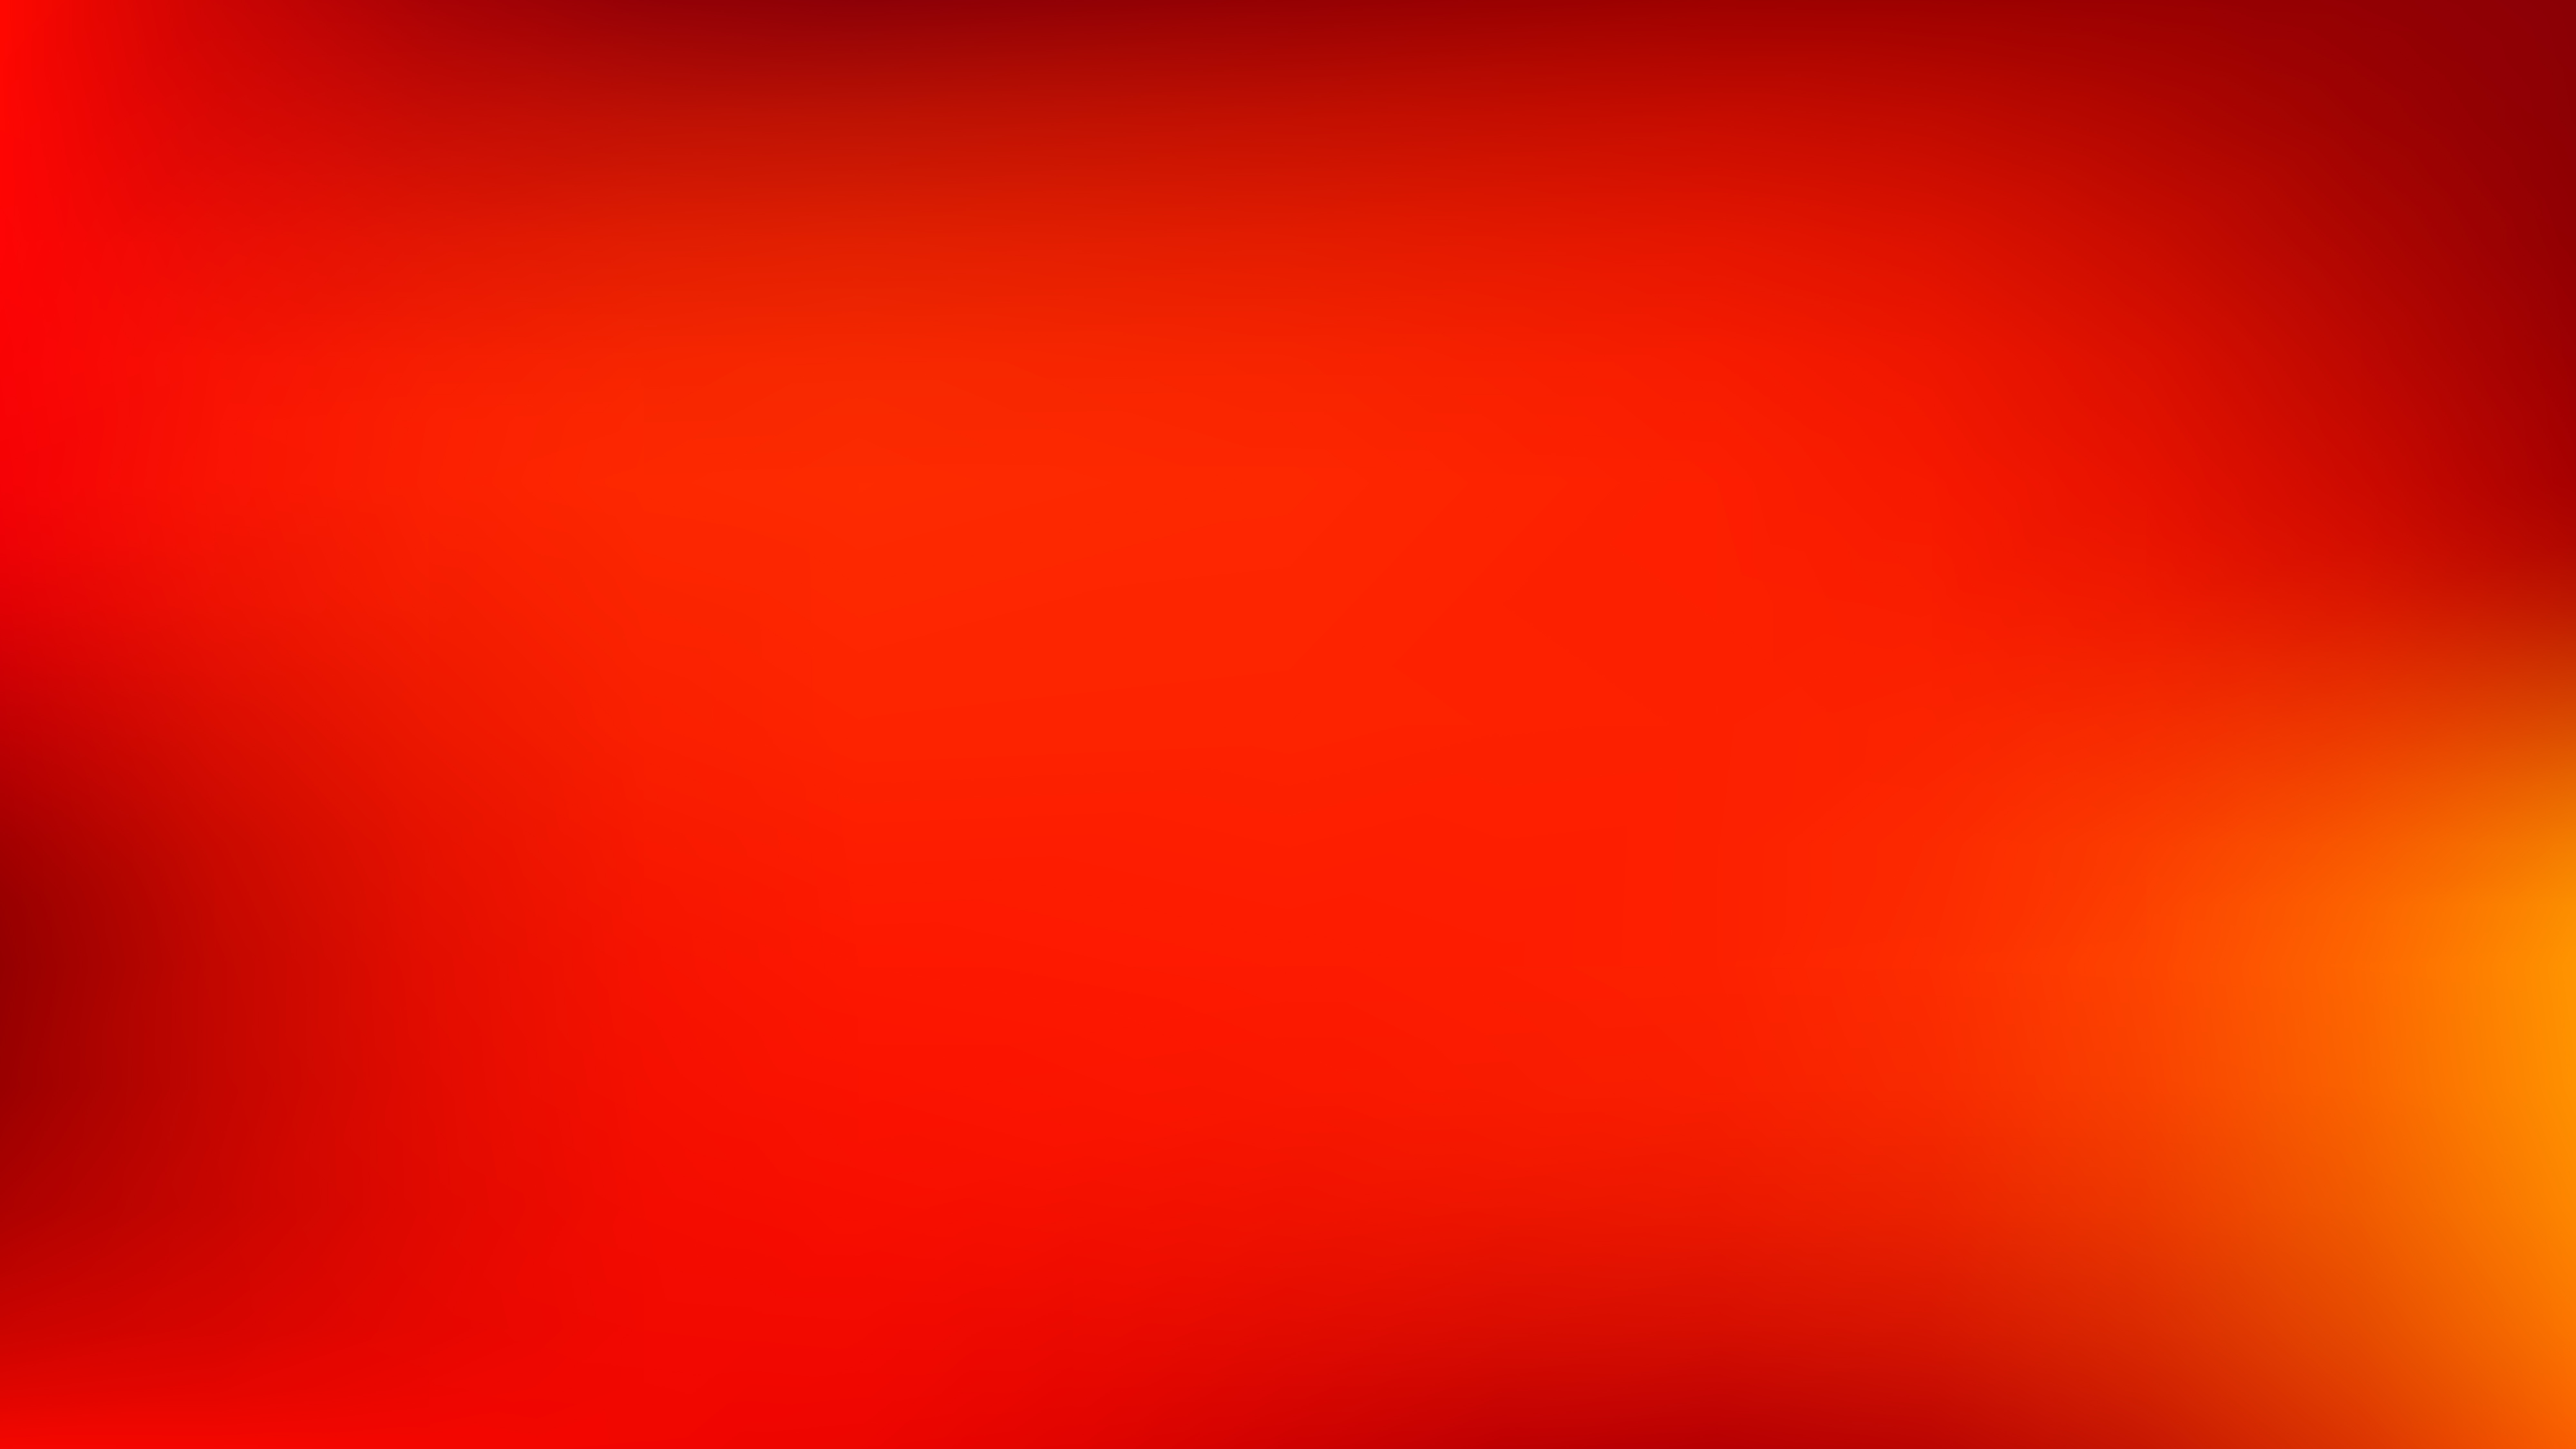 Free Red and Orange Photo Blurred Background Vector Image